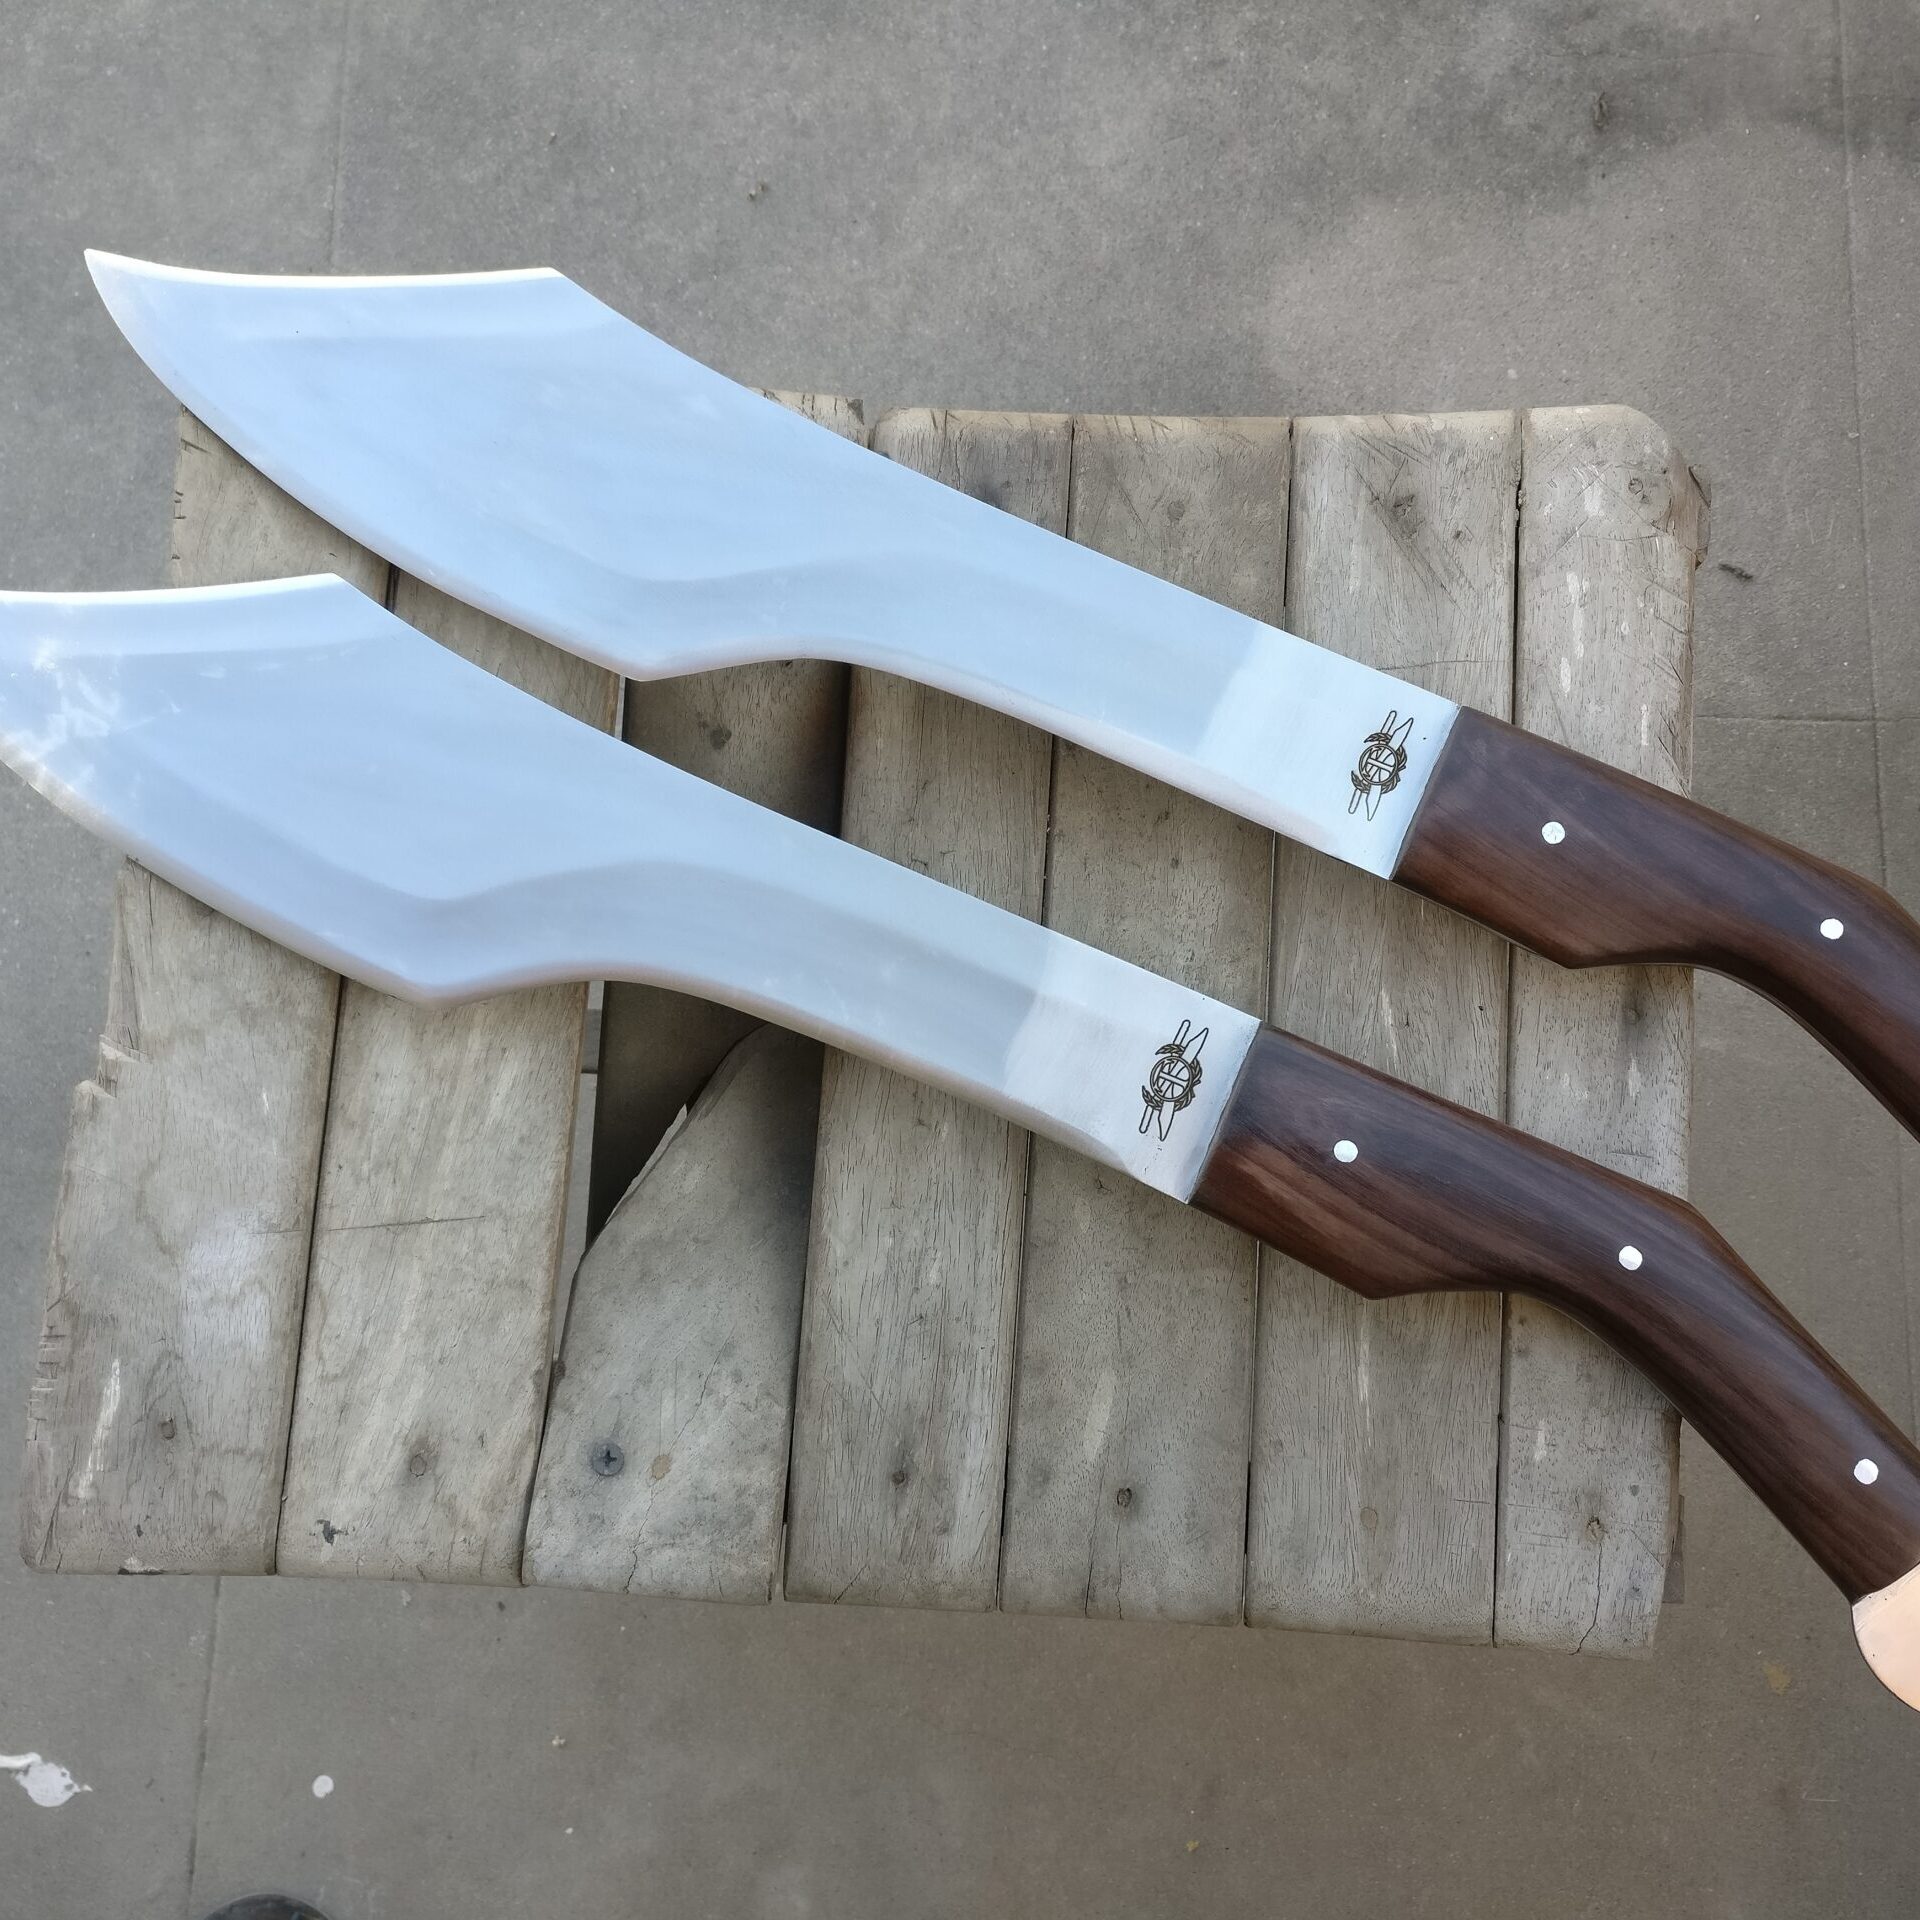 A pair of high carbon steel Torqueblade's made by Sanjay’s bladesIth’s